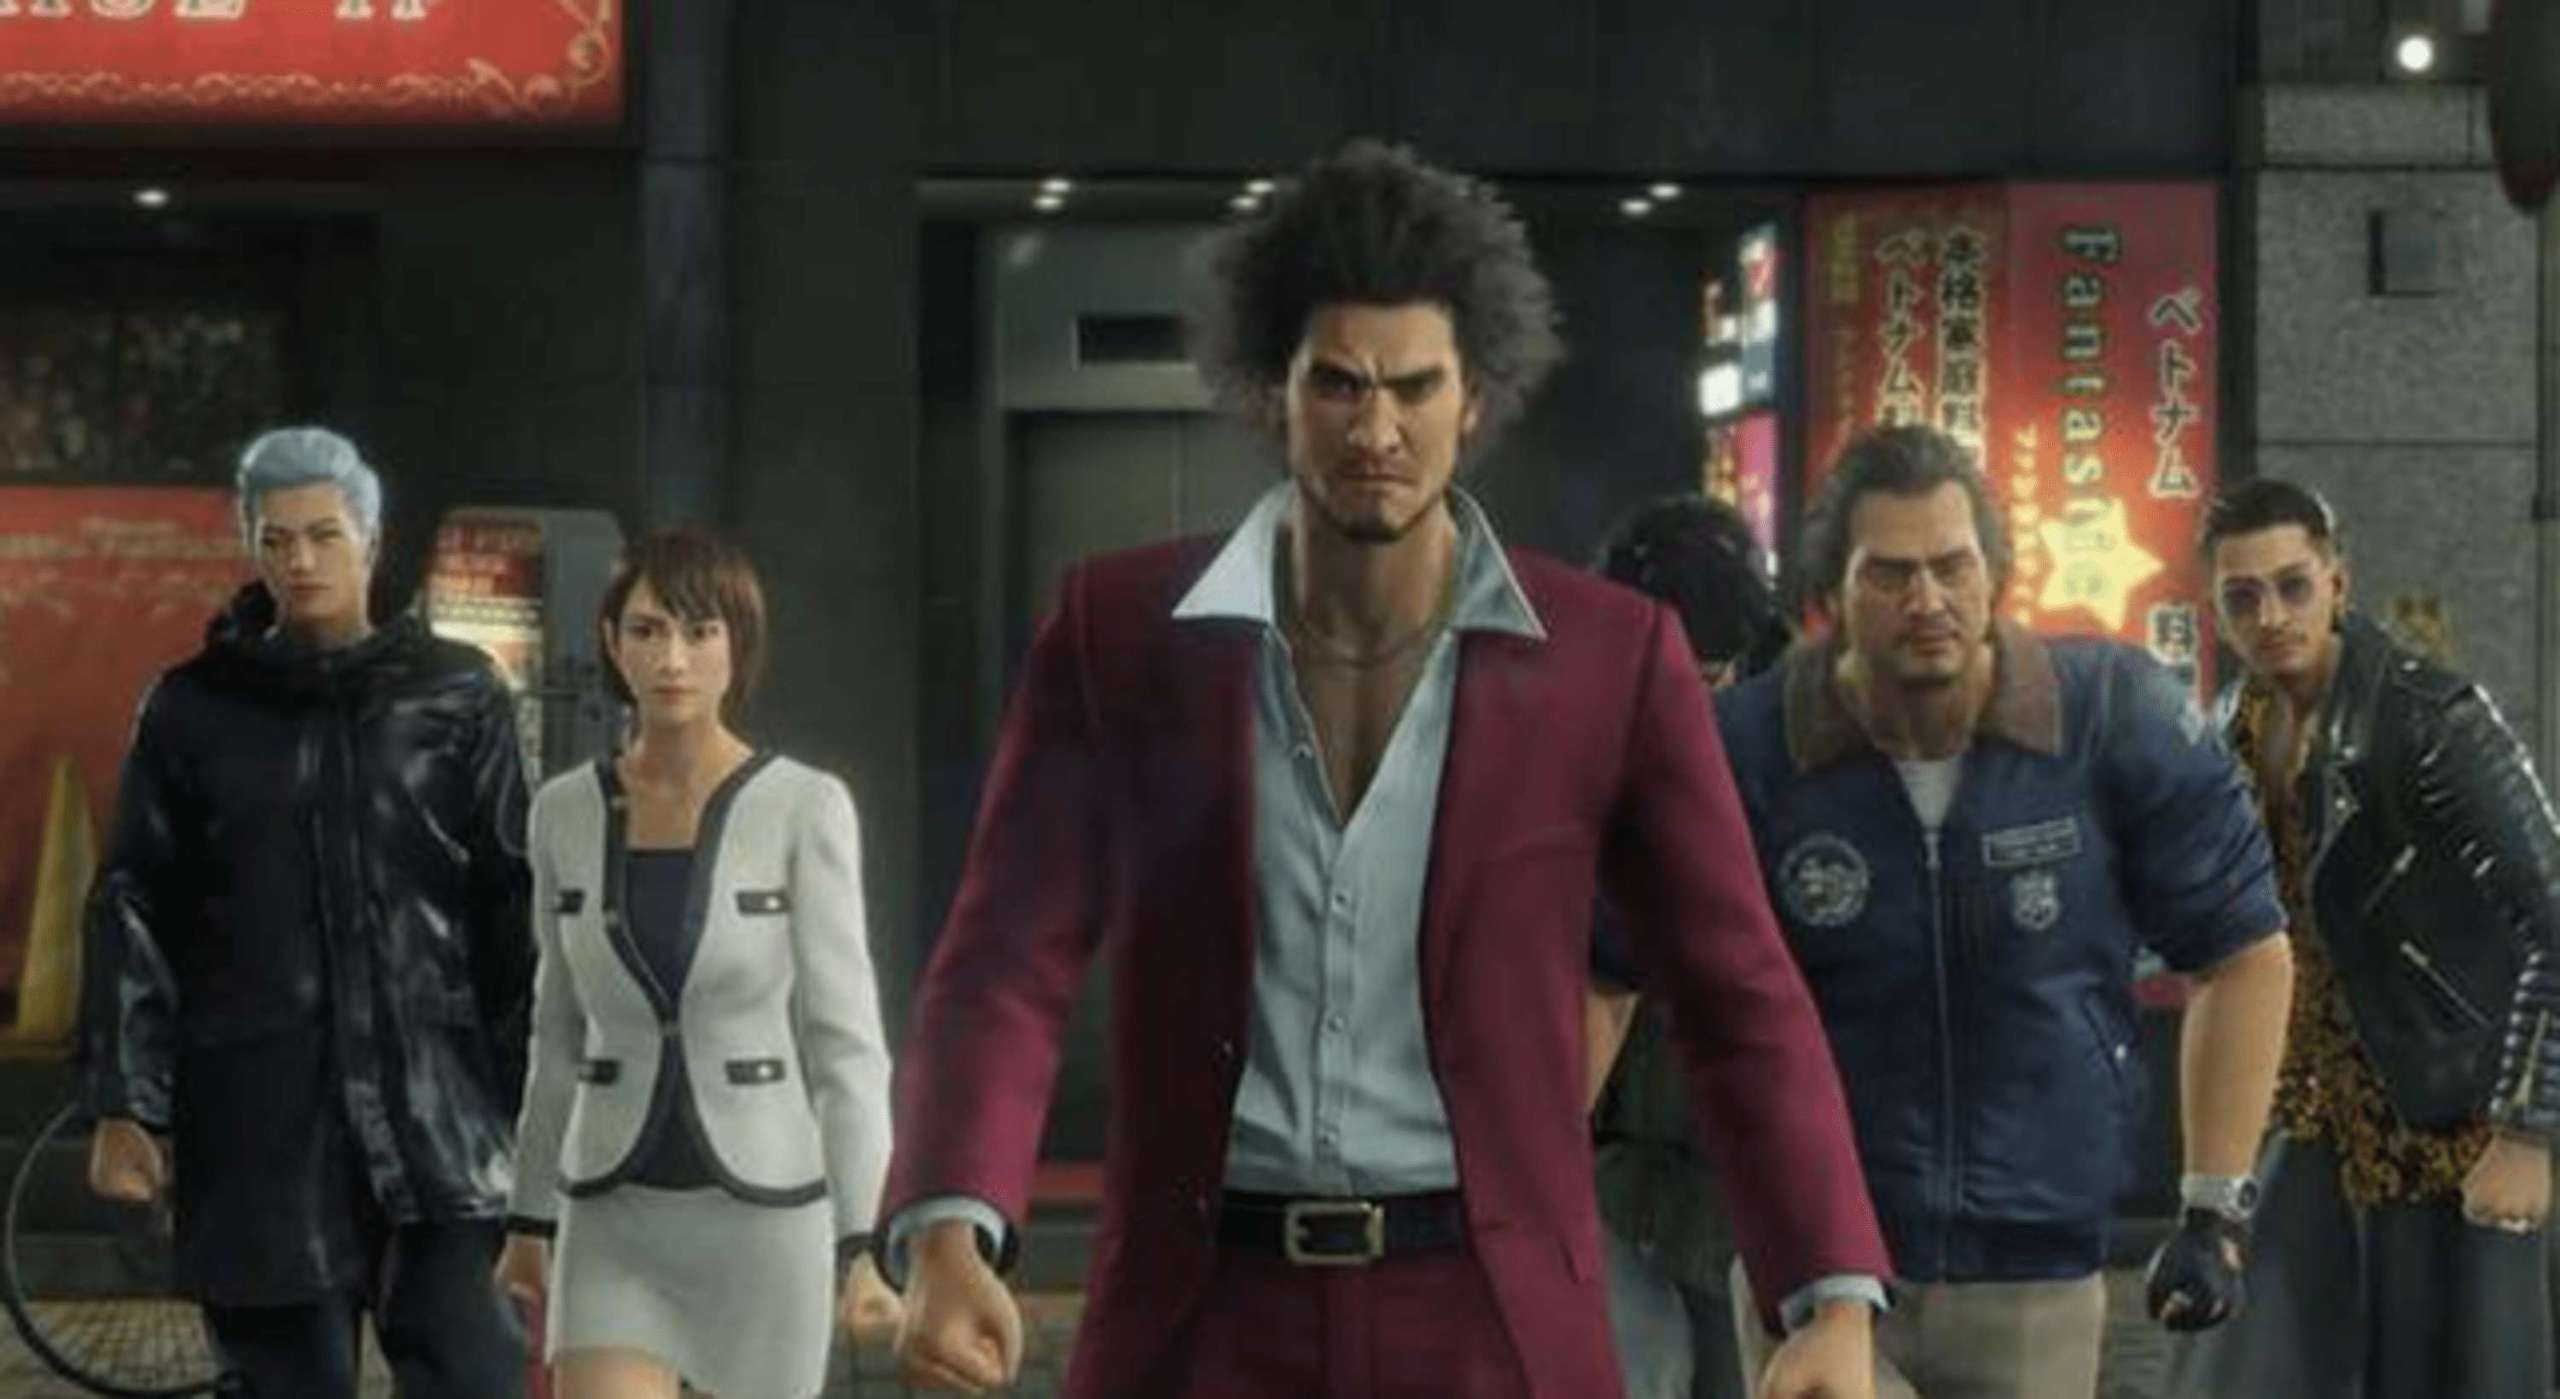 The Yakuza Team Is Waiting For Player Feedback Before Deciding On A Permanent Title For The Series